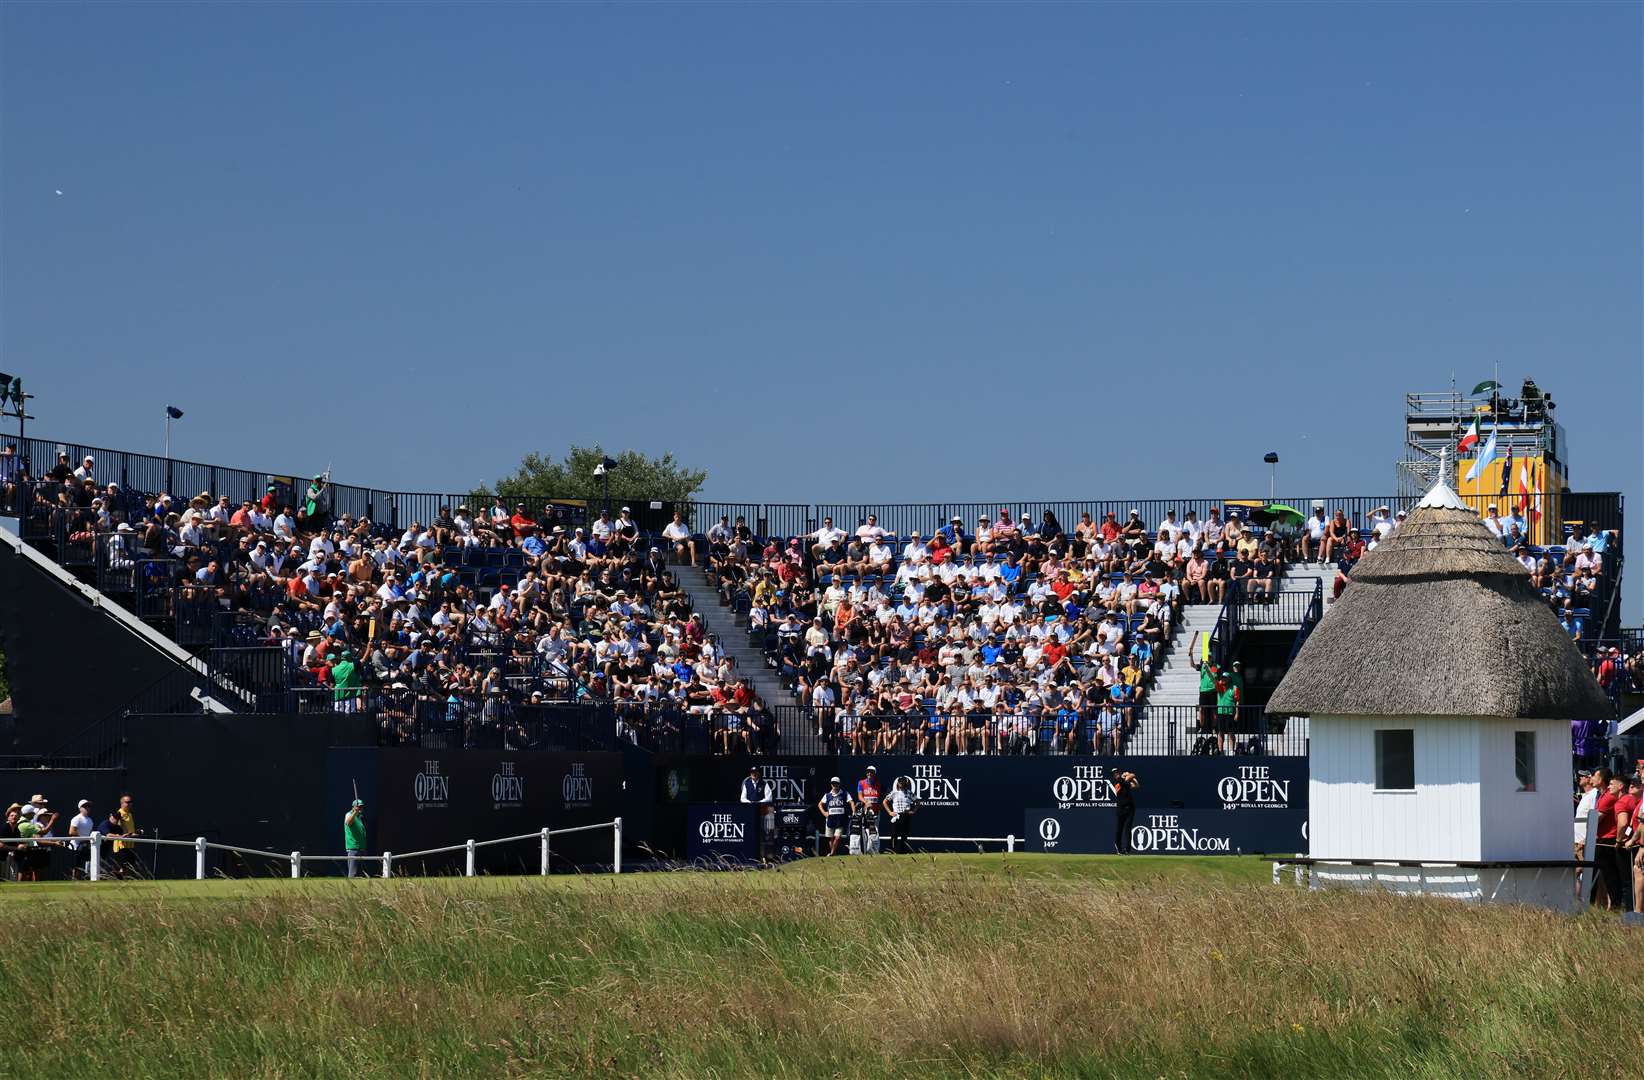 Thousands in the crowd watch Viktor Hovland of Norway tees off on the 1st hole during Day Four of The 149th Open at Royal St George’s Golf Club. Photo by David Cannon/R&A/R&A via Getty Images